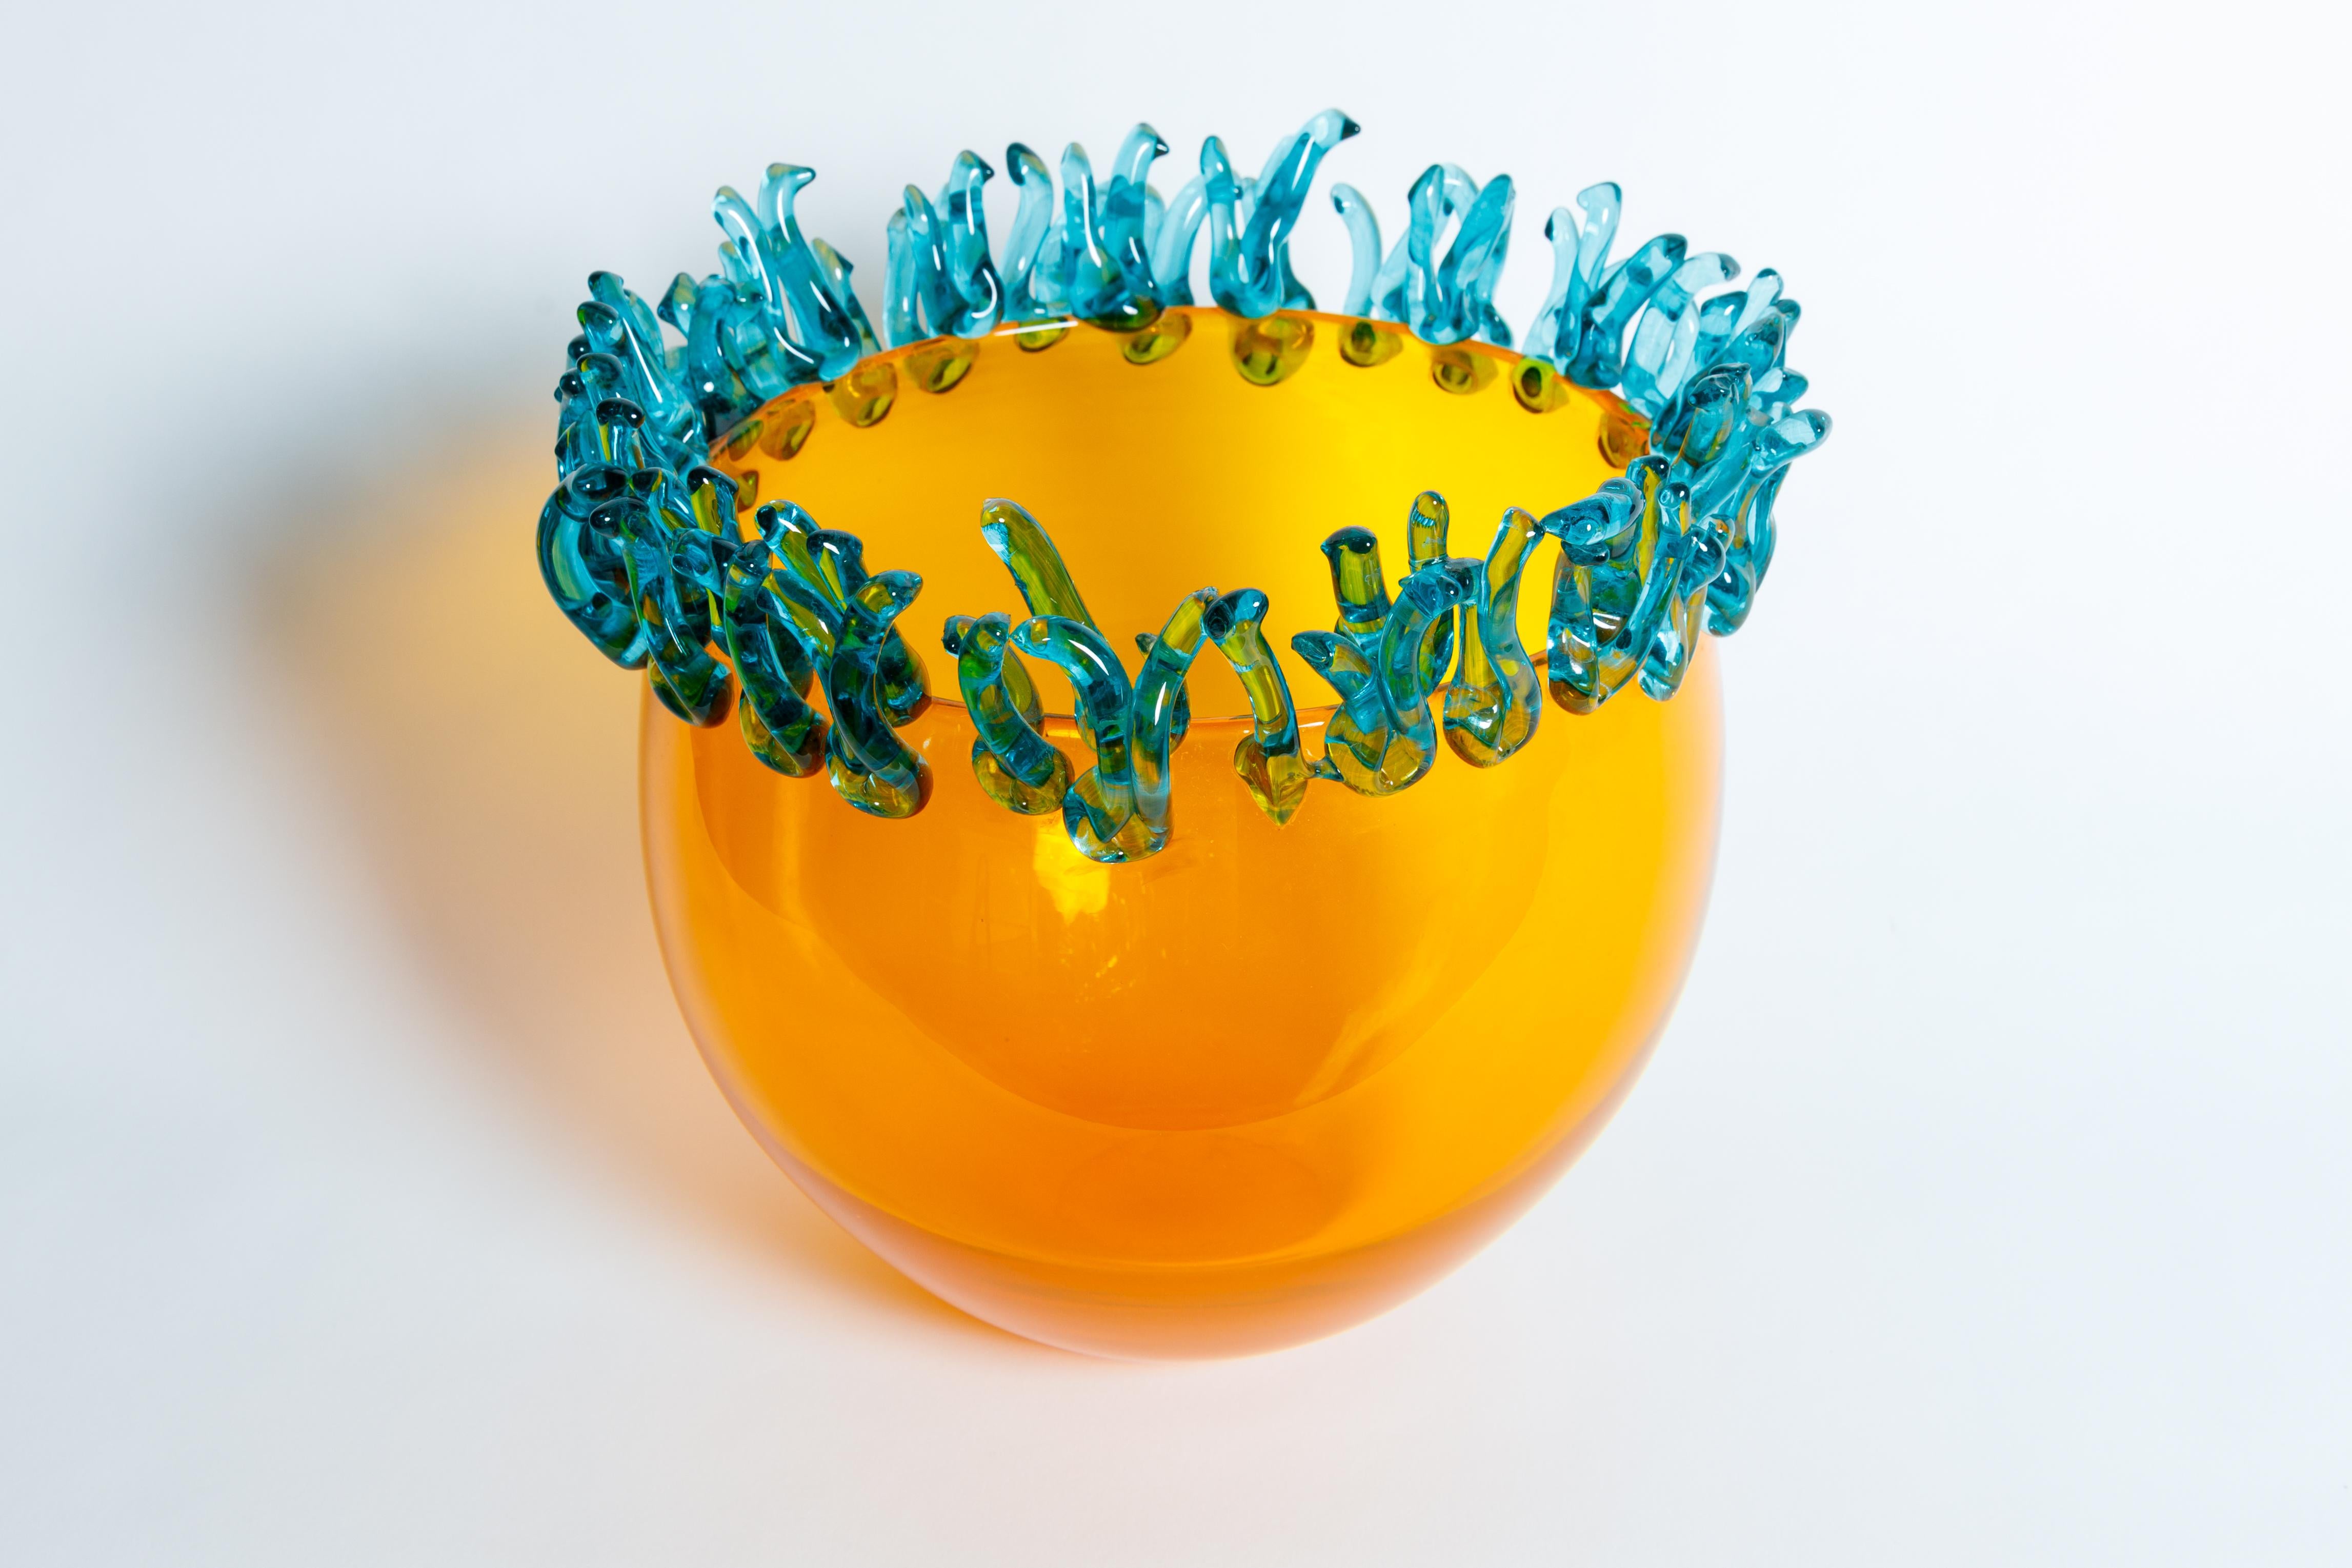 Mid-Century Modern Murano Glass Bowl, Orange with Blue Appliques, signed Barovier For Sale